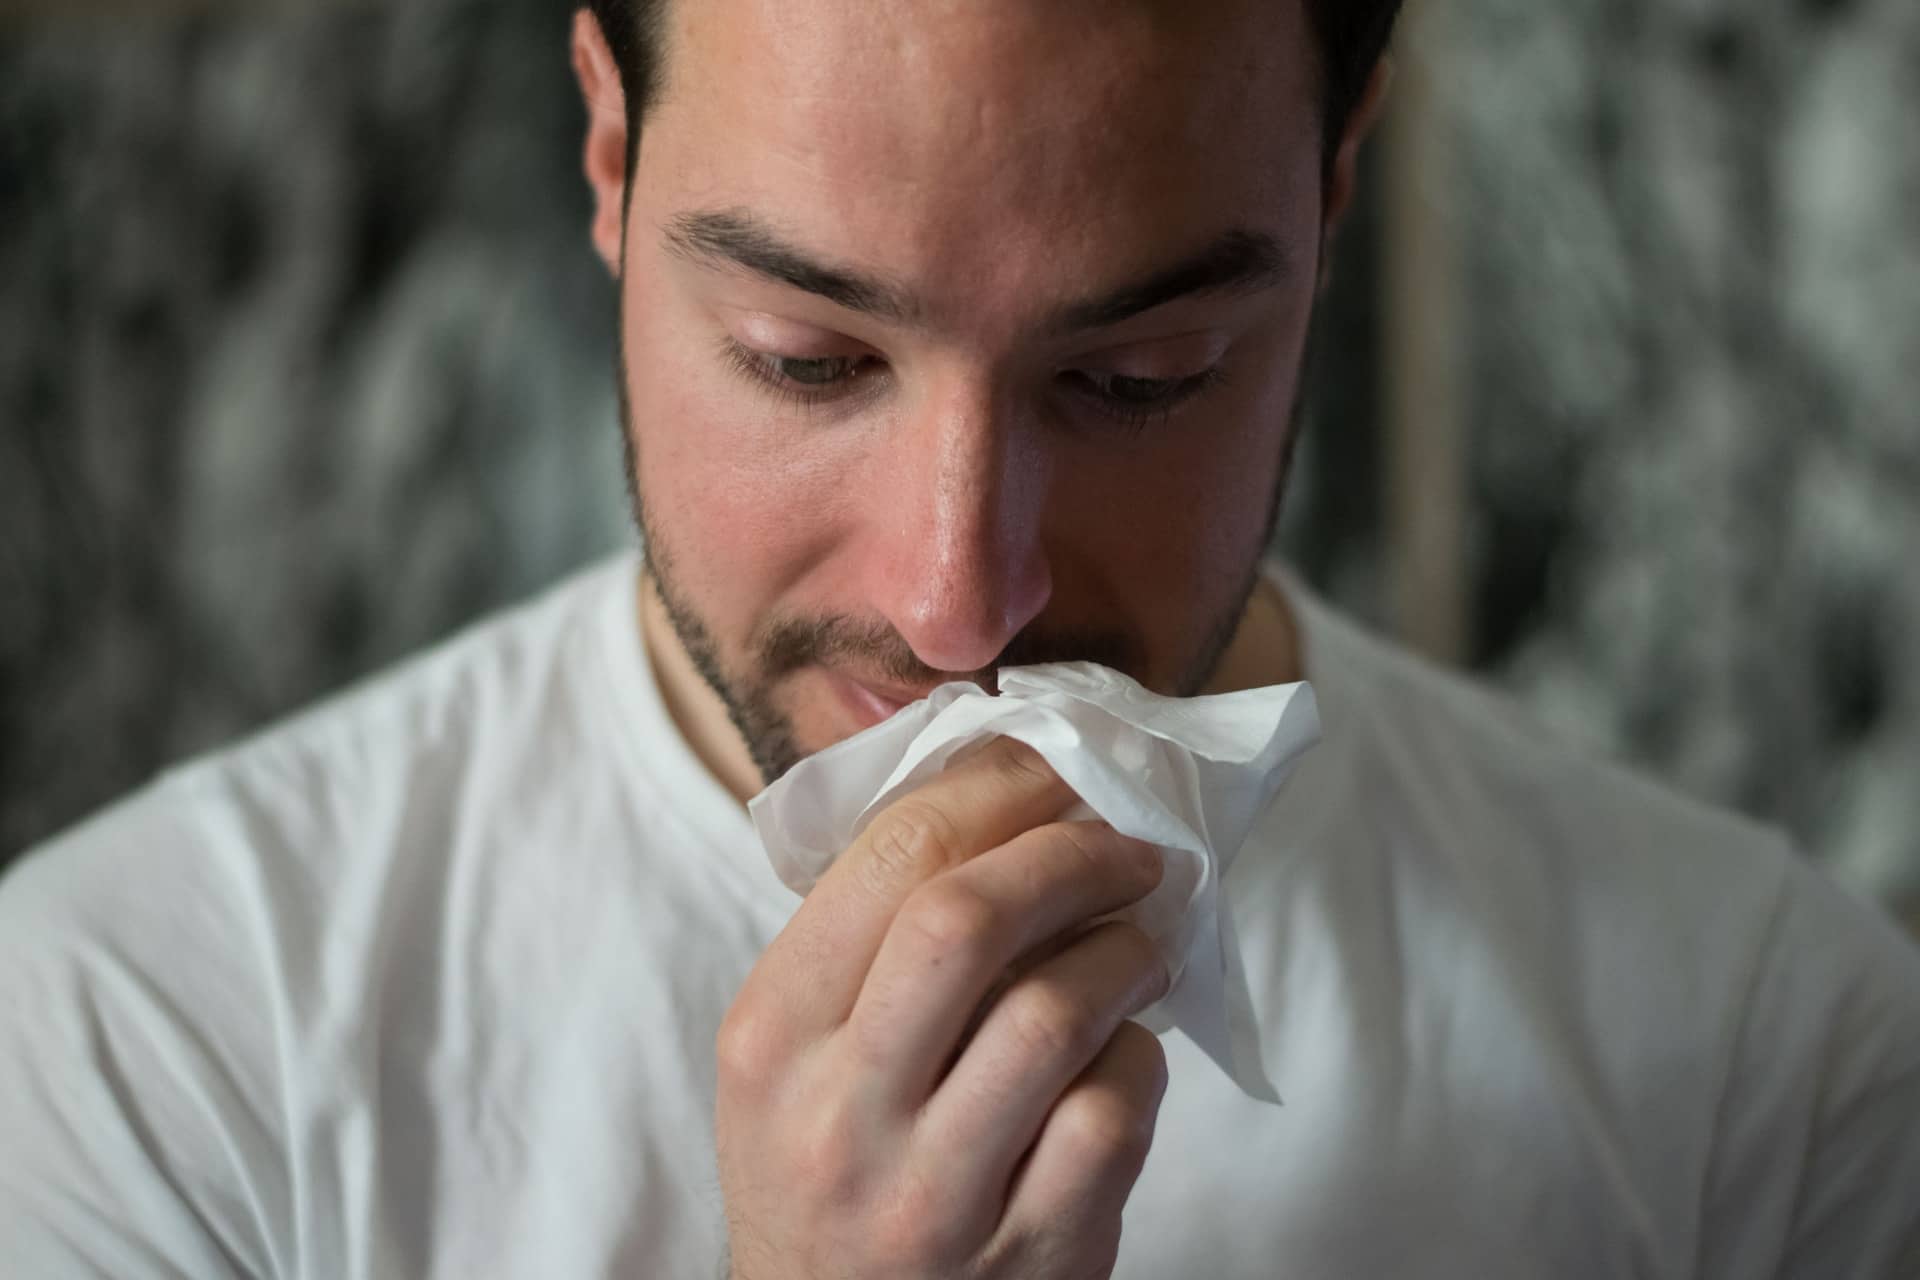 man wiping nose with a tissue